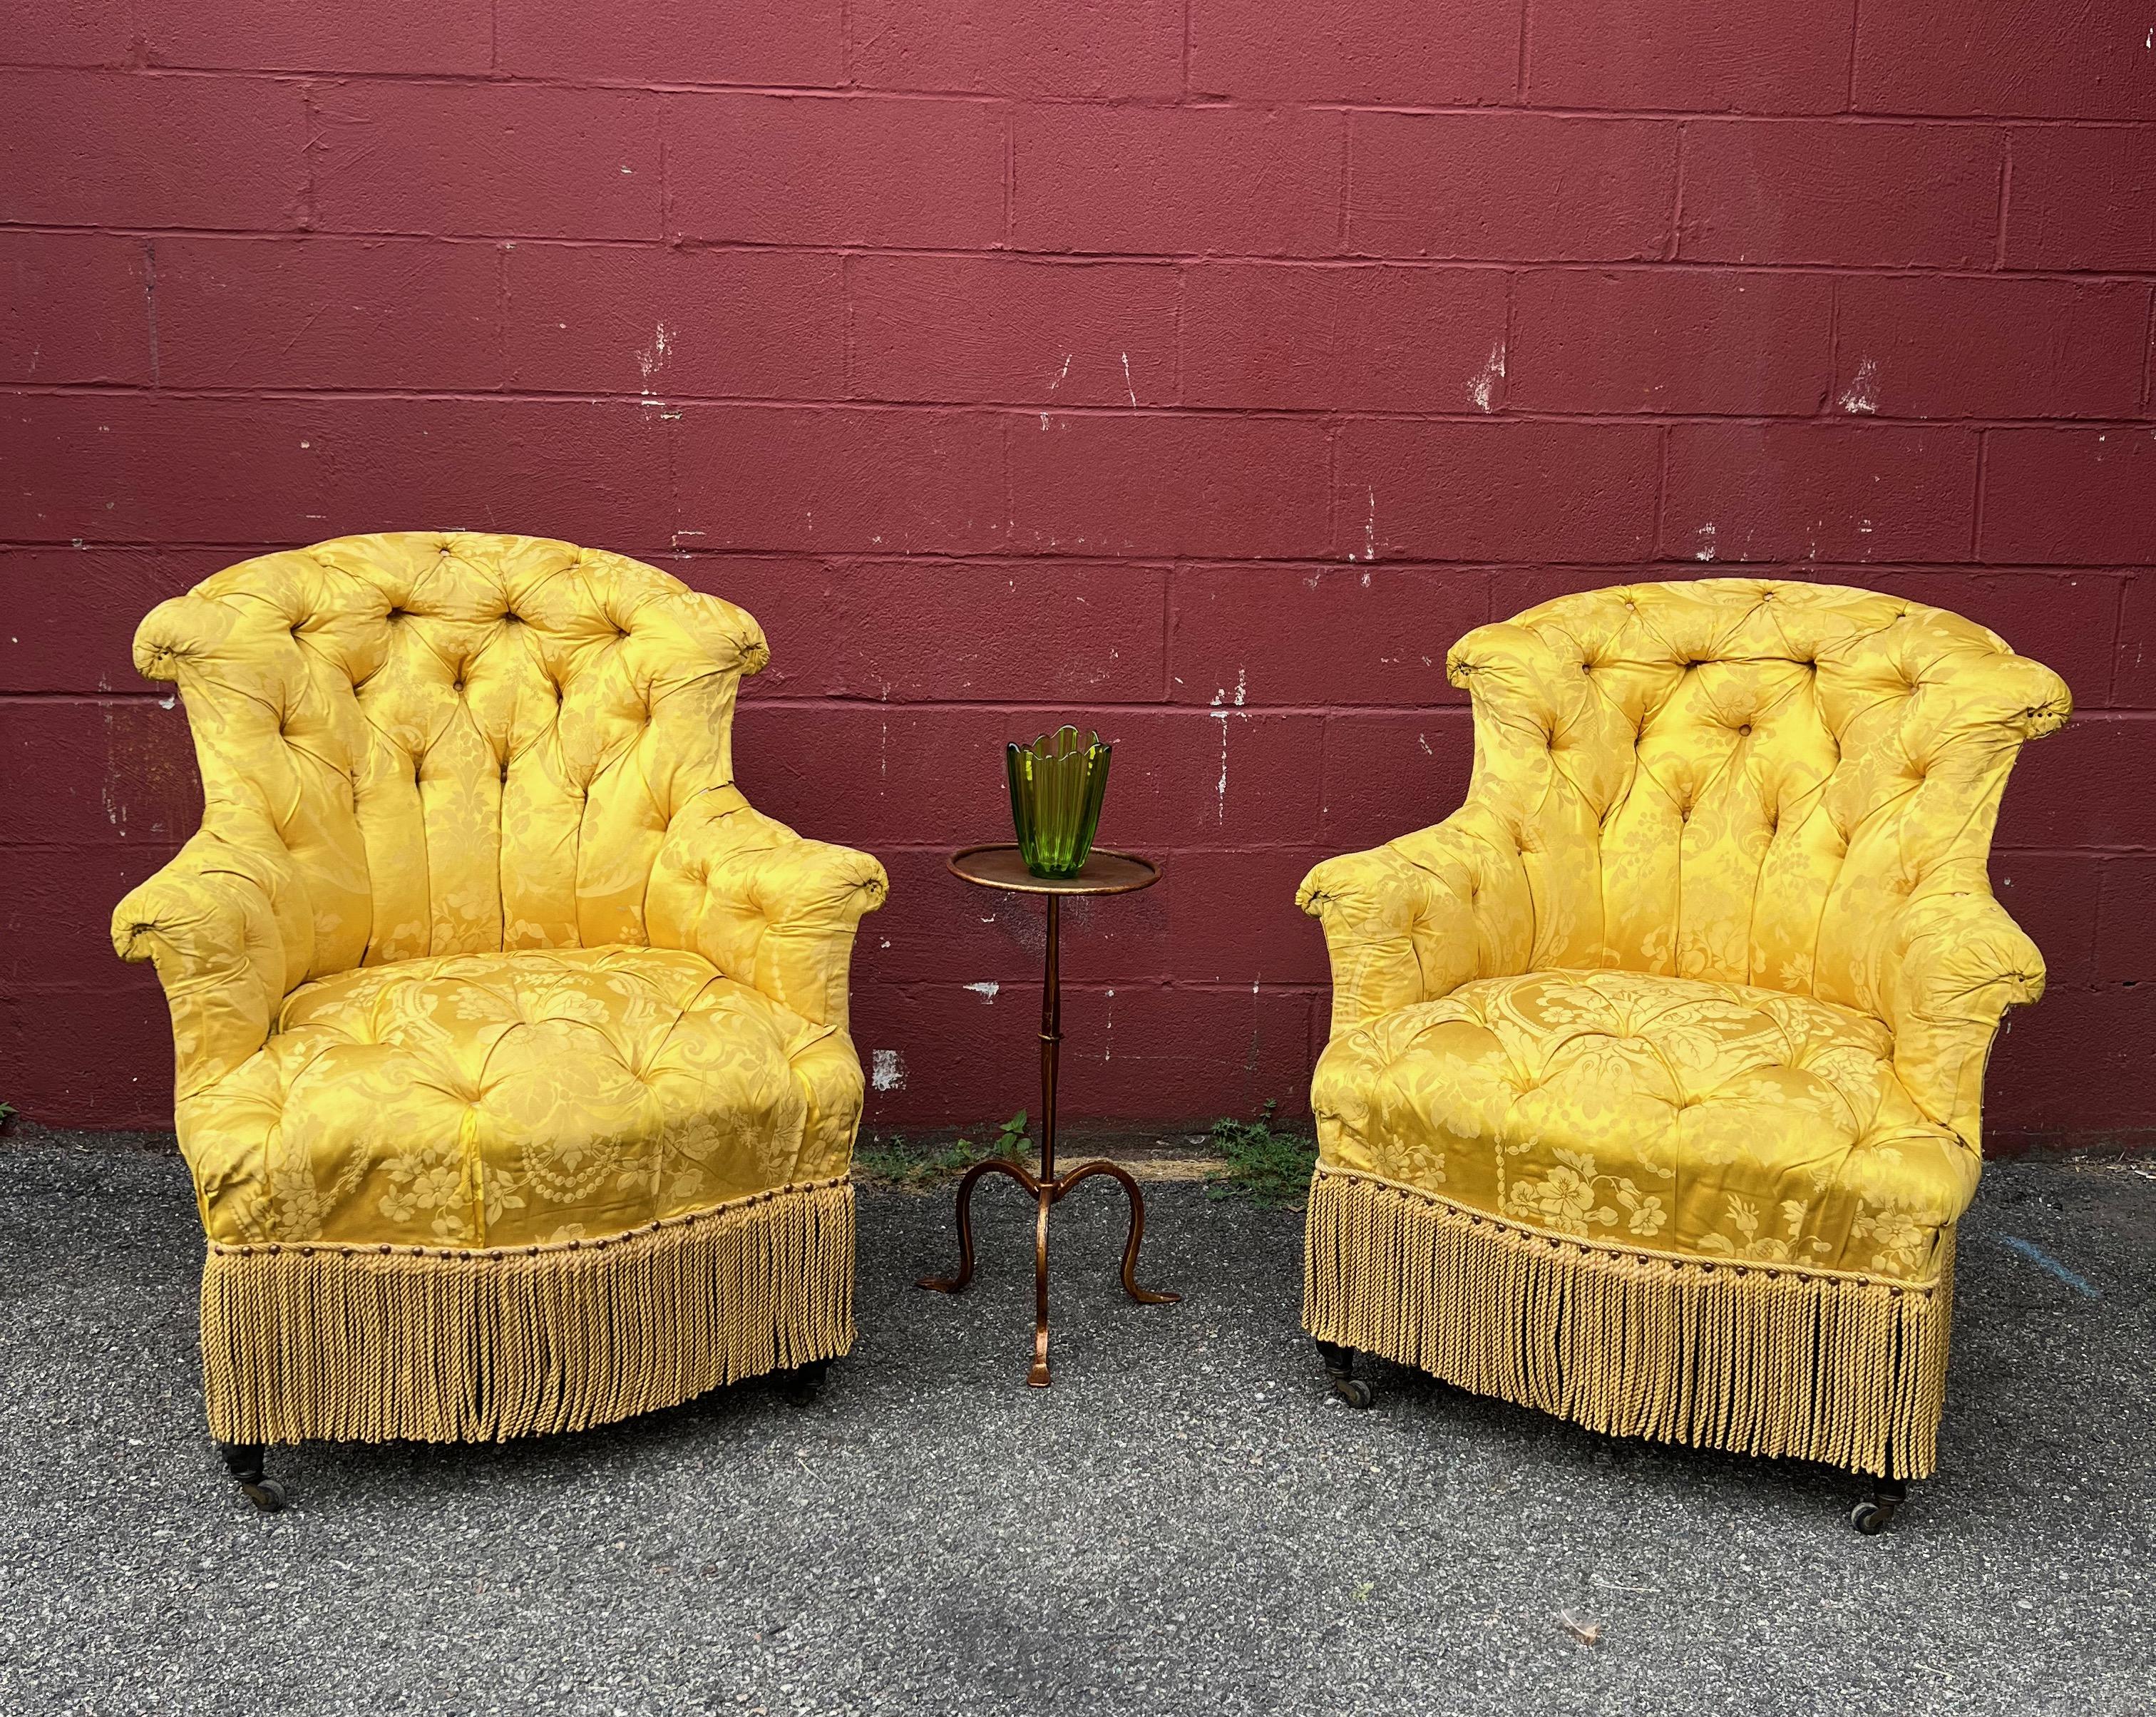 An  exquisitely tufted pair of French Napoleon III arm chairs with graceful rolled arms and backs. Both the back and seat are tufted in a yellow/ gold damask silk and the back is upholstered in a contrasting solid fabric. The chairs are finished off